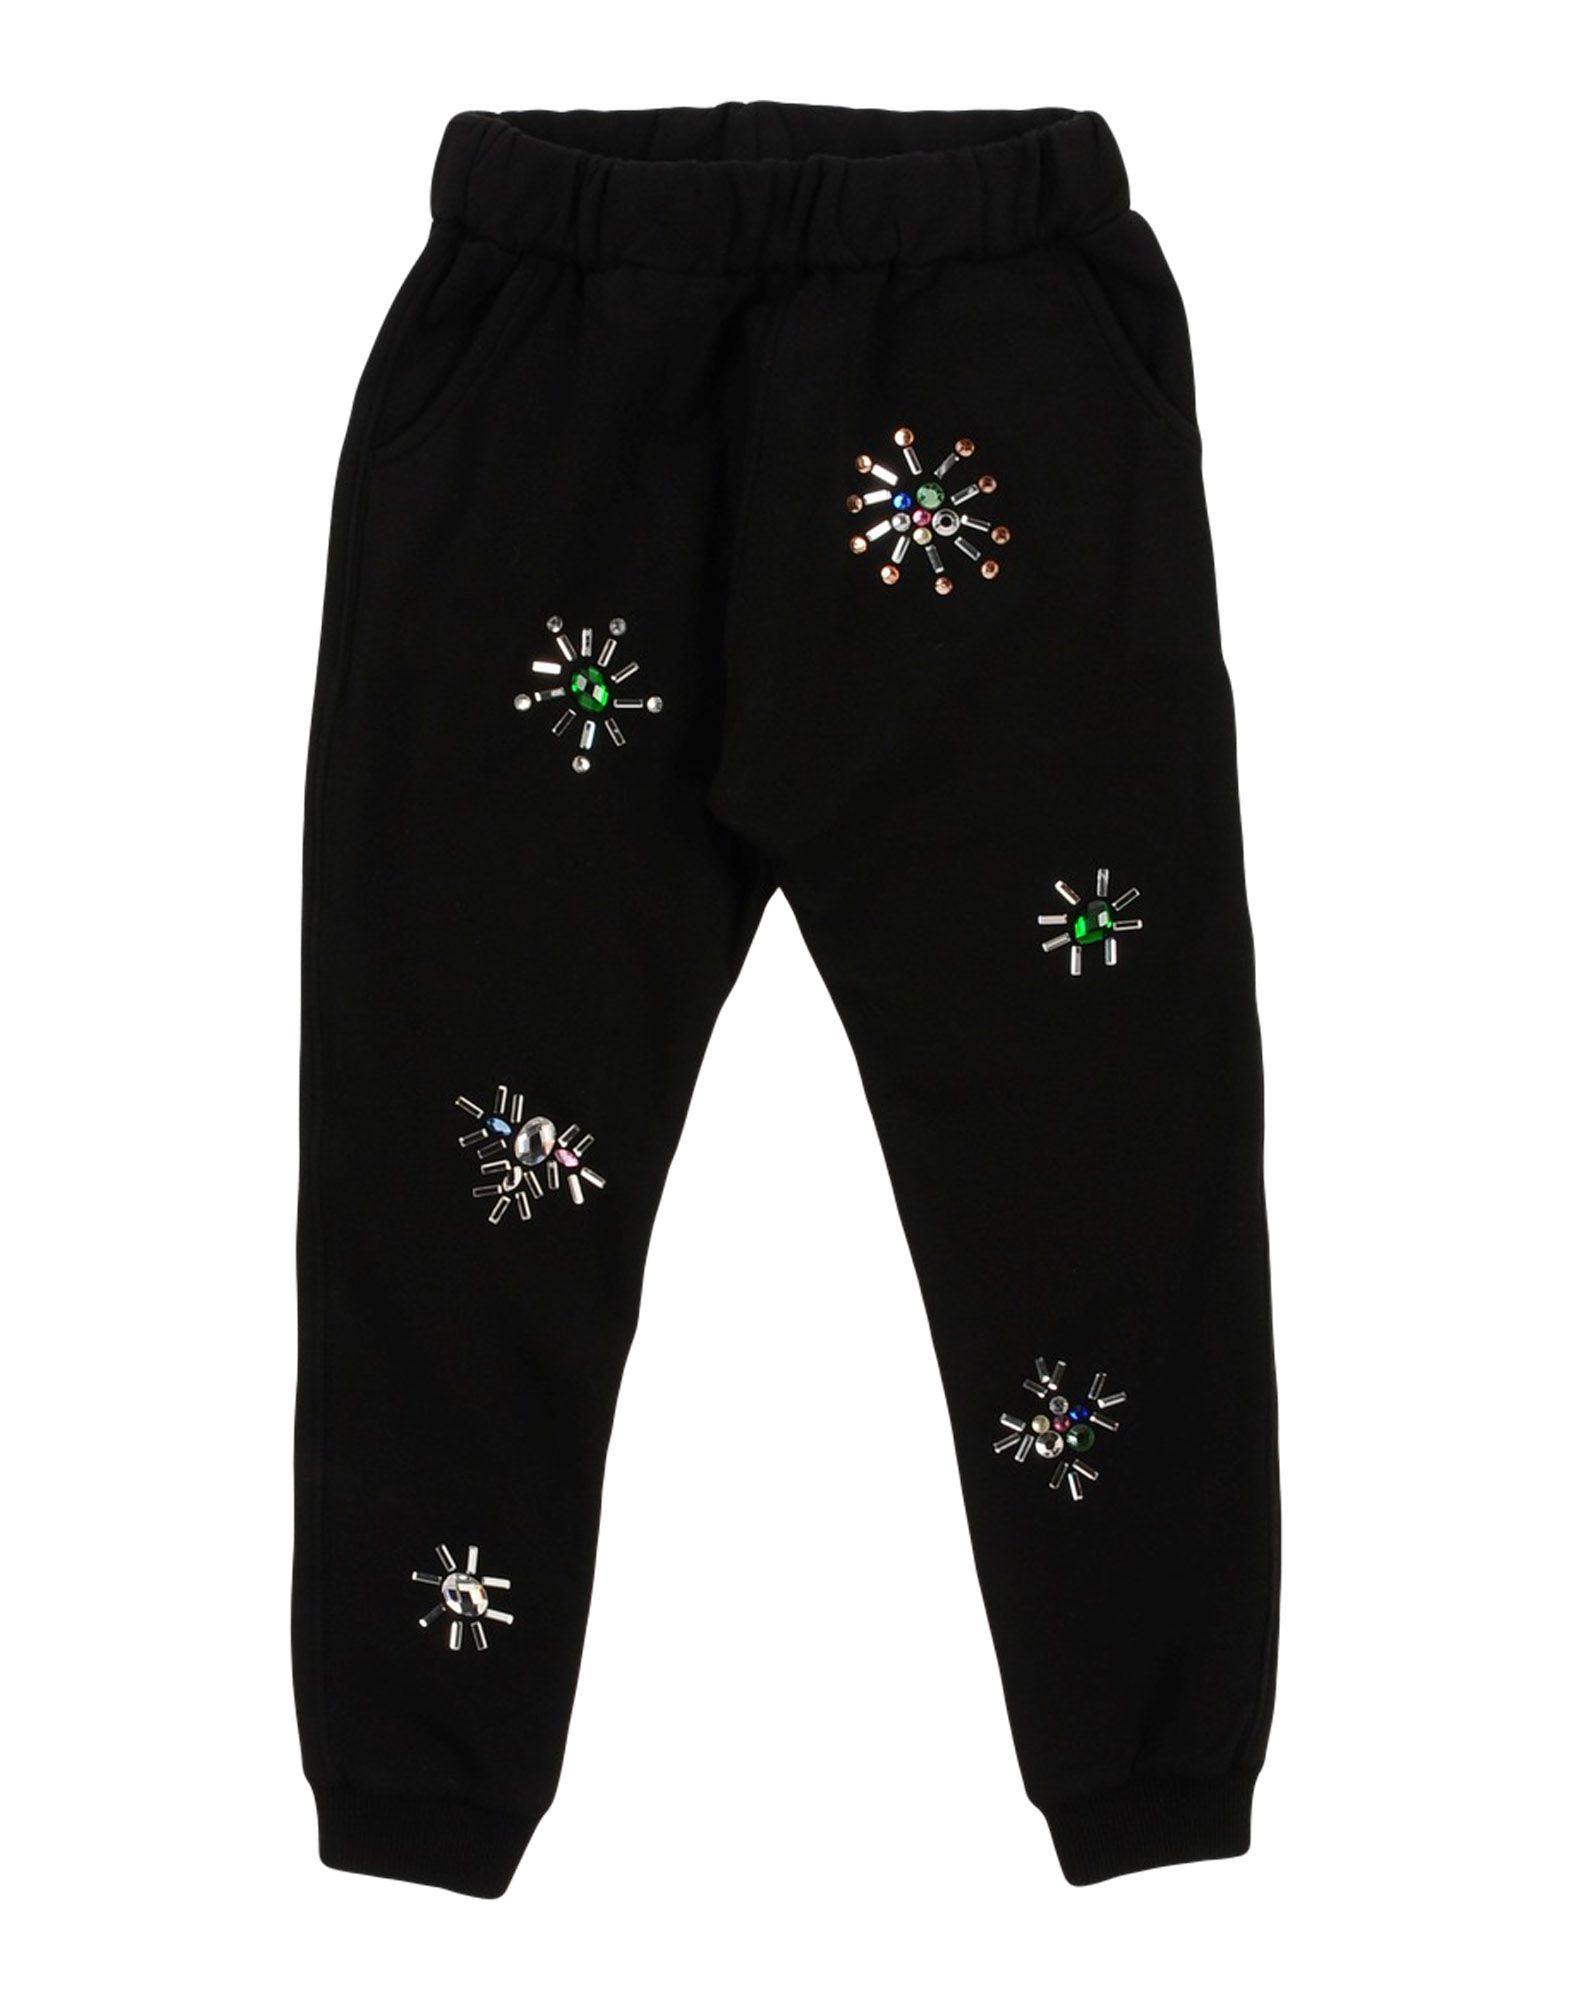 About Me Handmade Kids' Casual Pants In Black